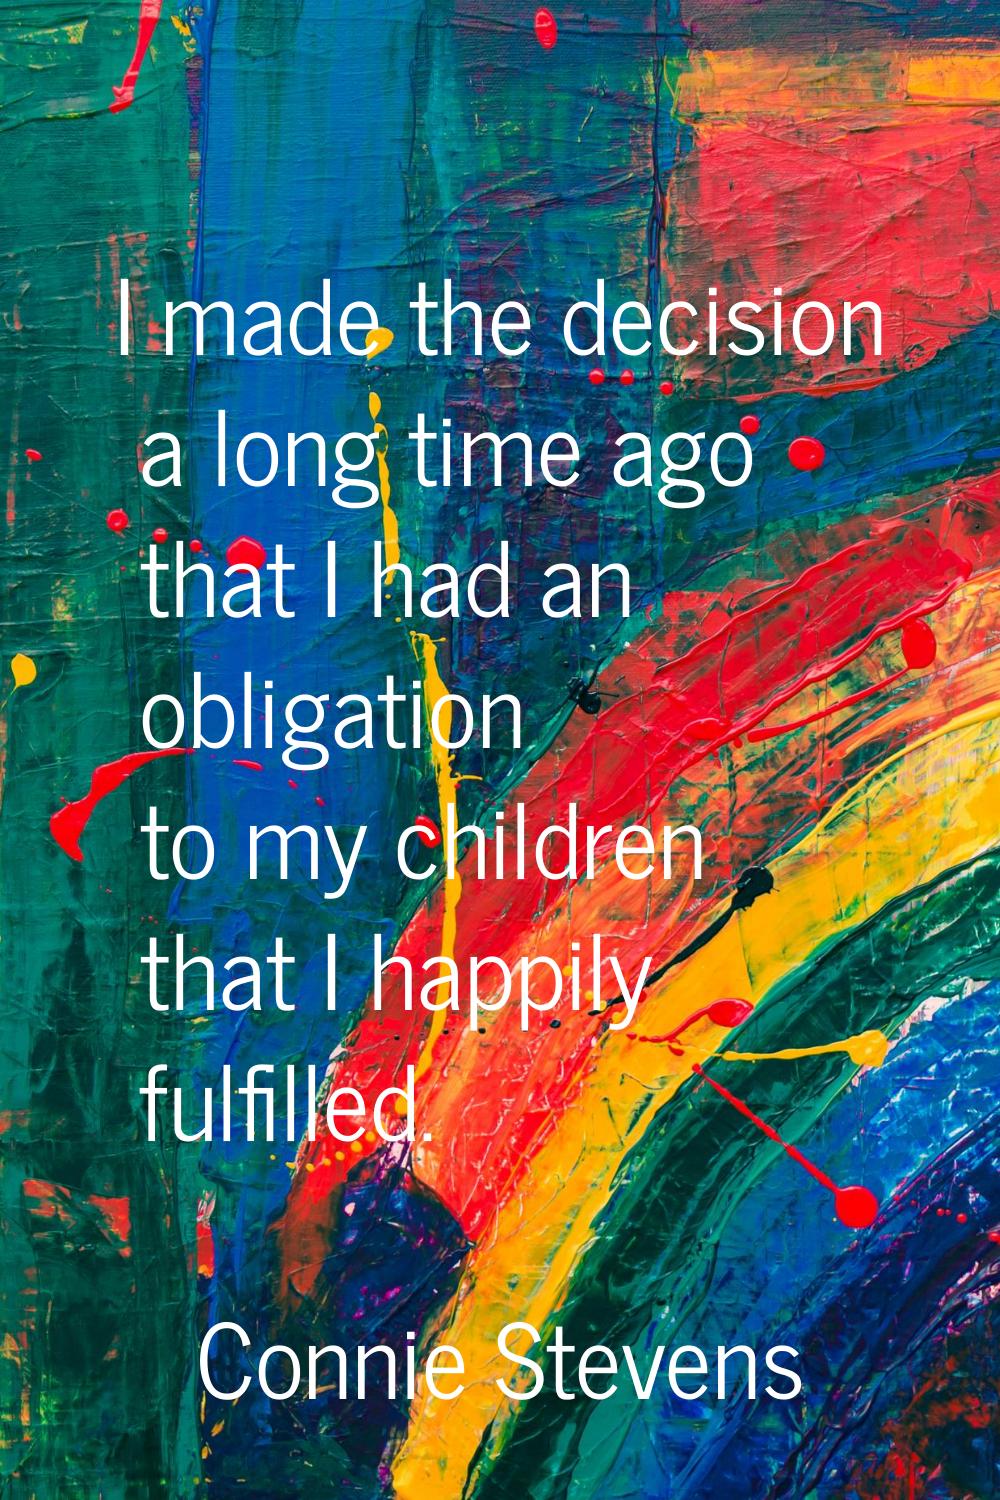 I made the decision a long time ago that I had an obligation to my children that I happily fulfille